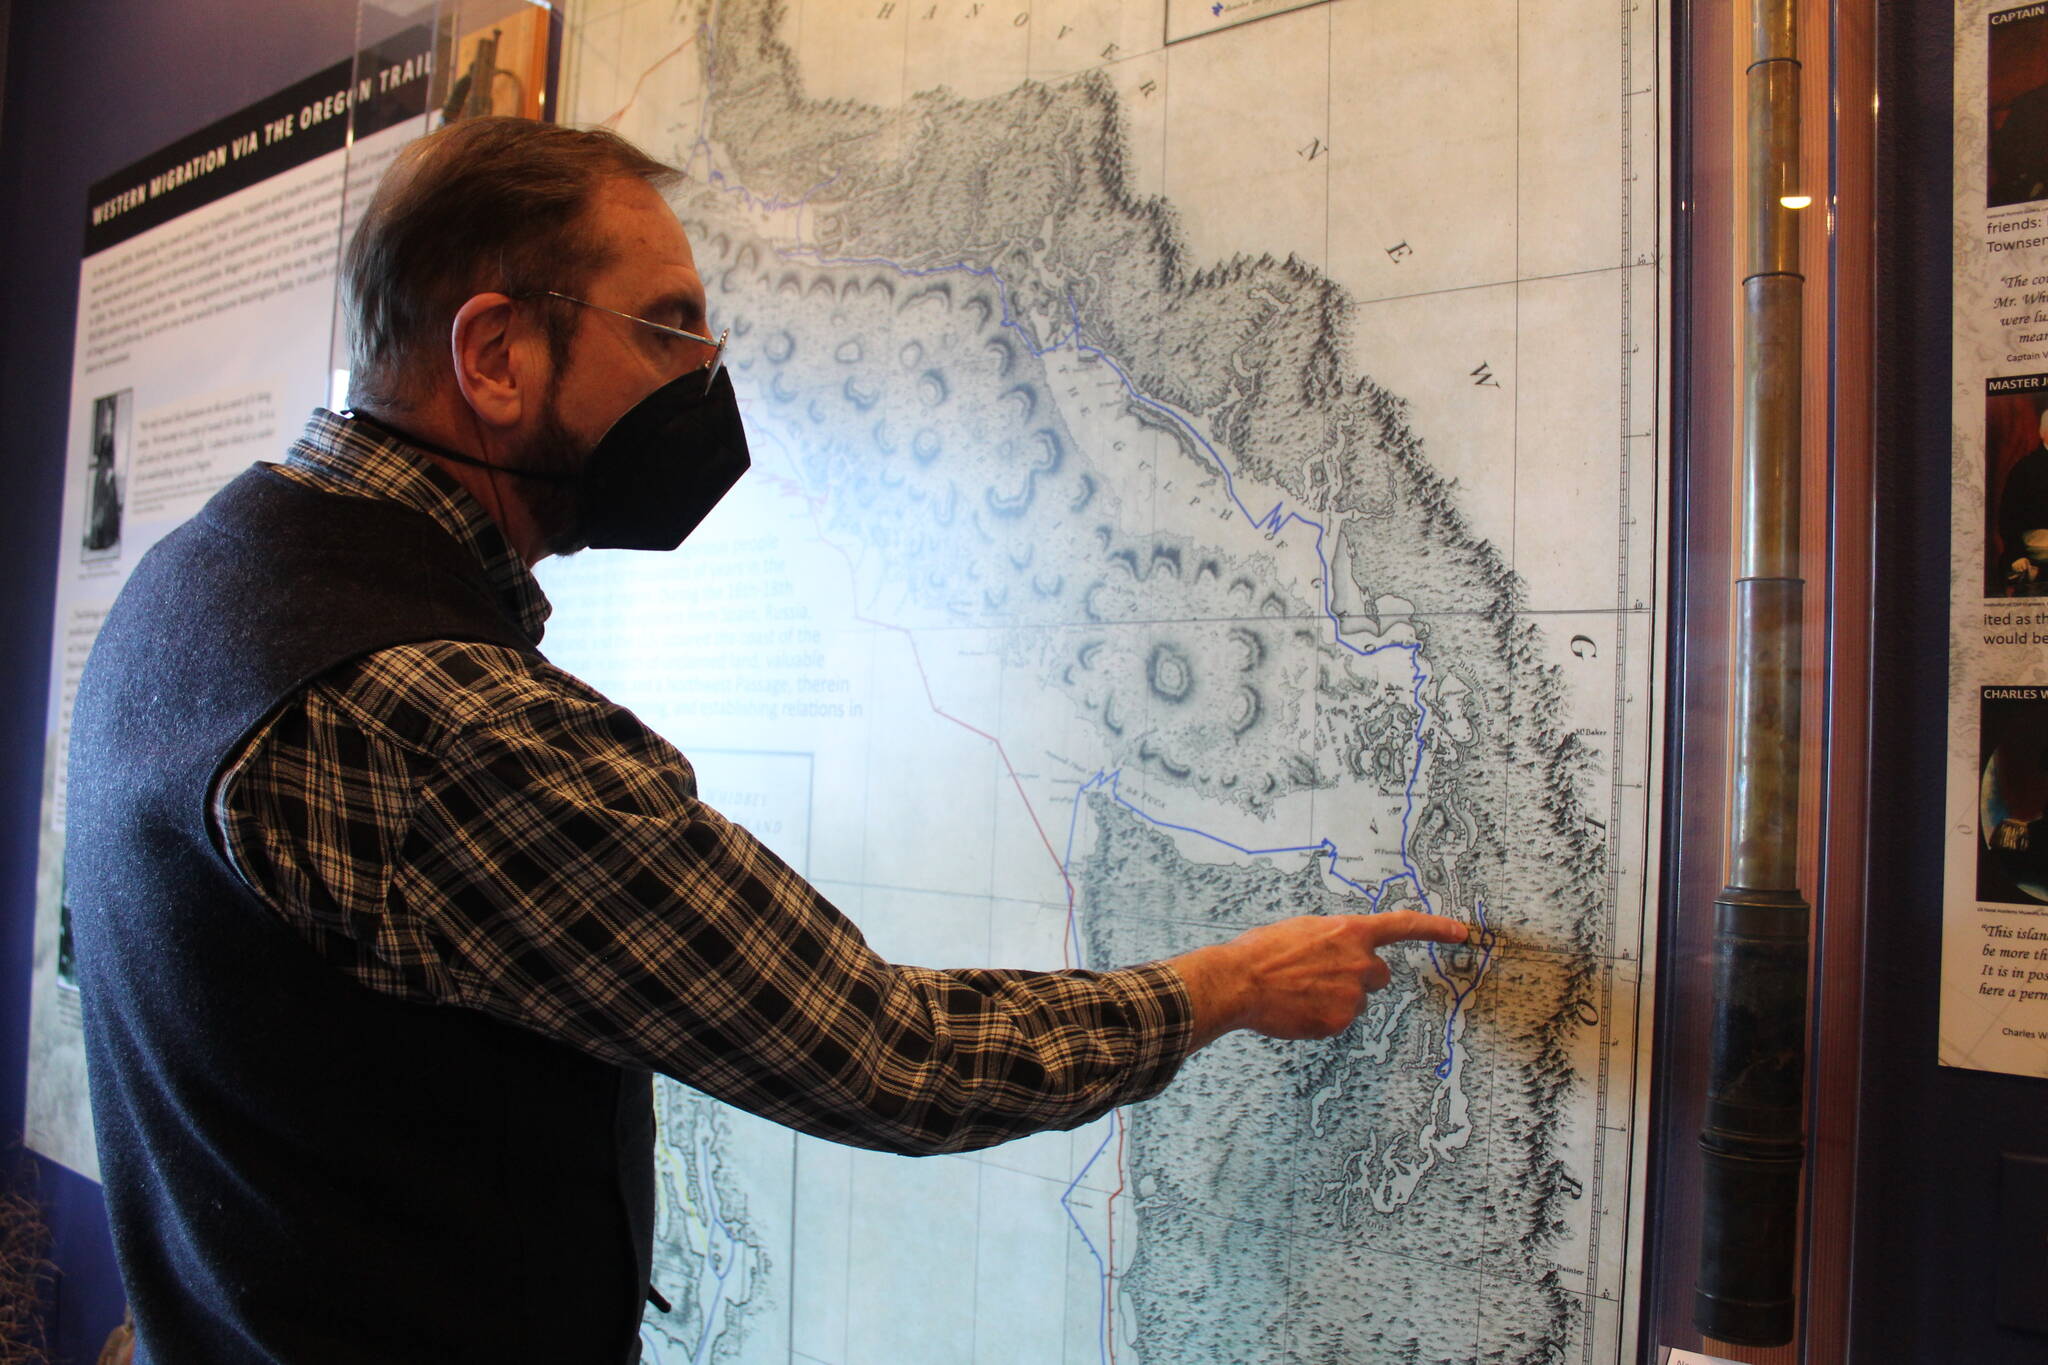 Photo by Karina Andrew/Whidbey News-Times
Rick Castellano points out routes taken by European explorers on a rendering of an early map of the Puget Sound area.